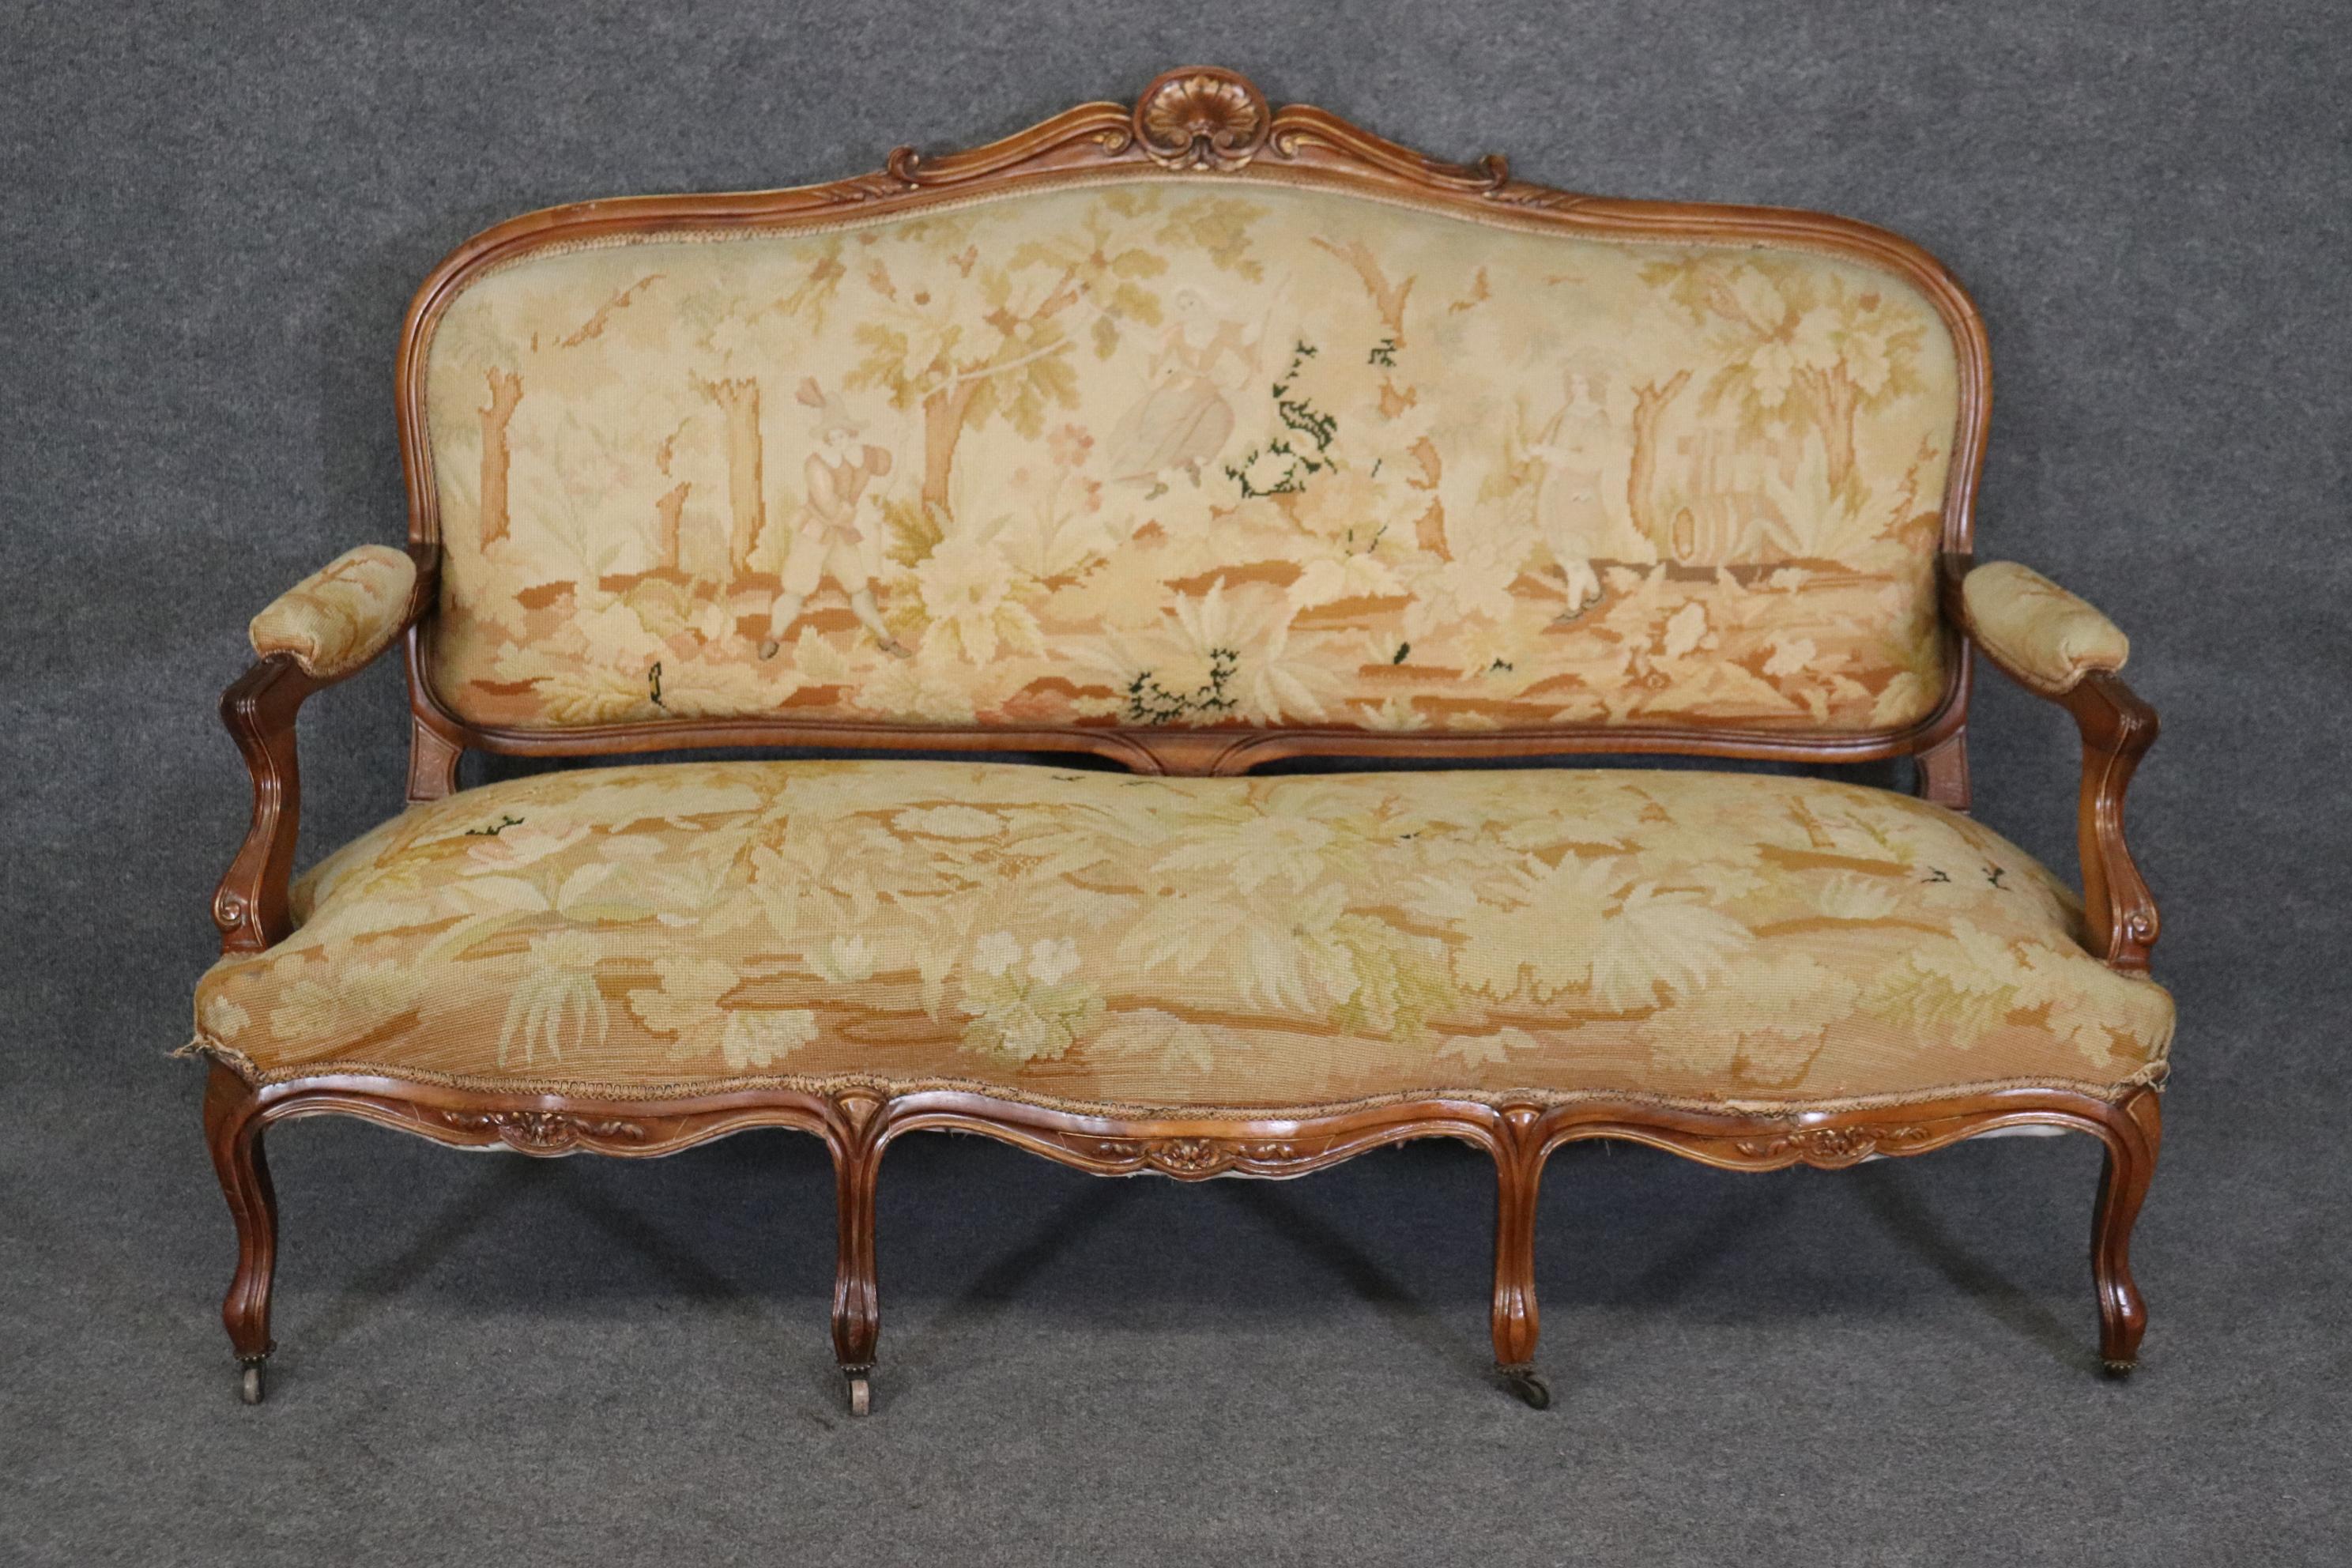 This is a beautiful carved walnut French Louis XV settee in needlepoint. The settee is in good condition with some stains on the back which is to be expected and the needlepoint is actually in rather decent condition with no major issues worth